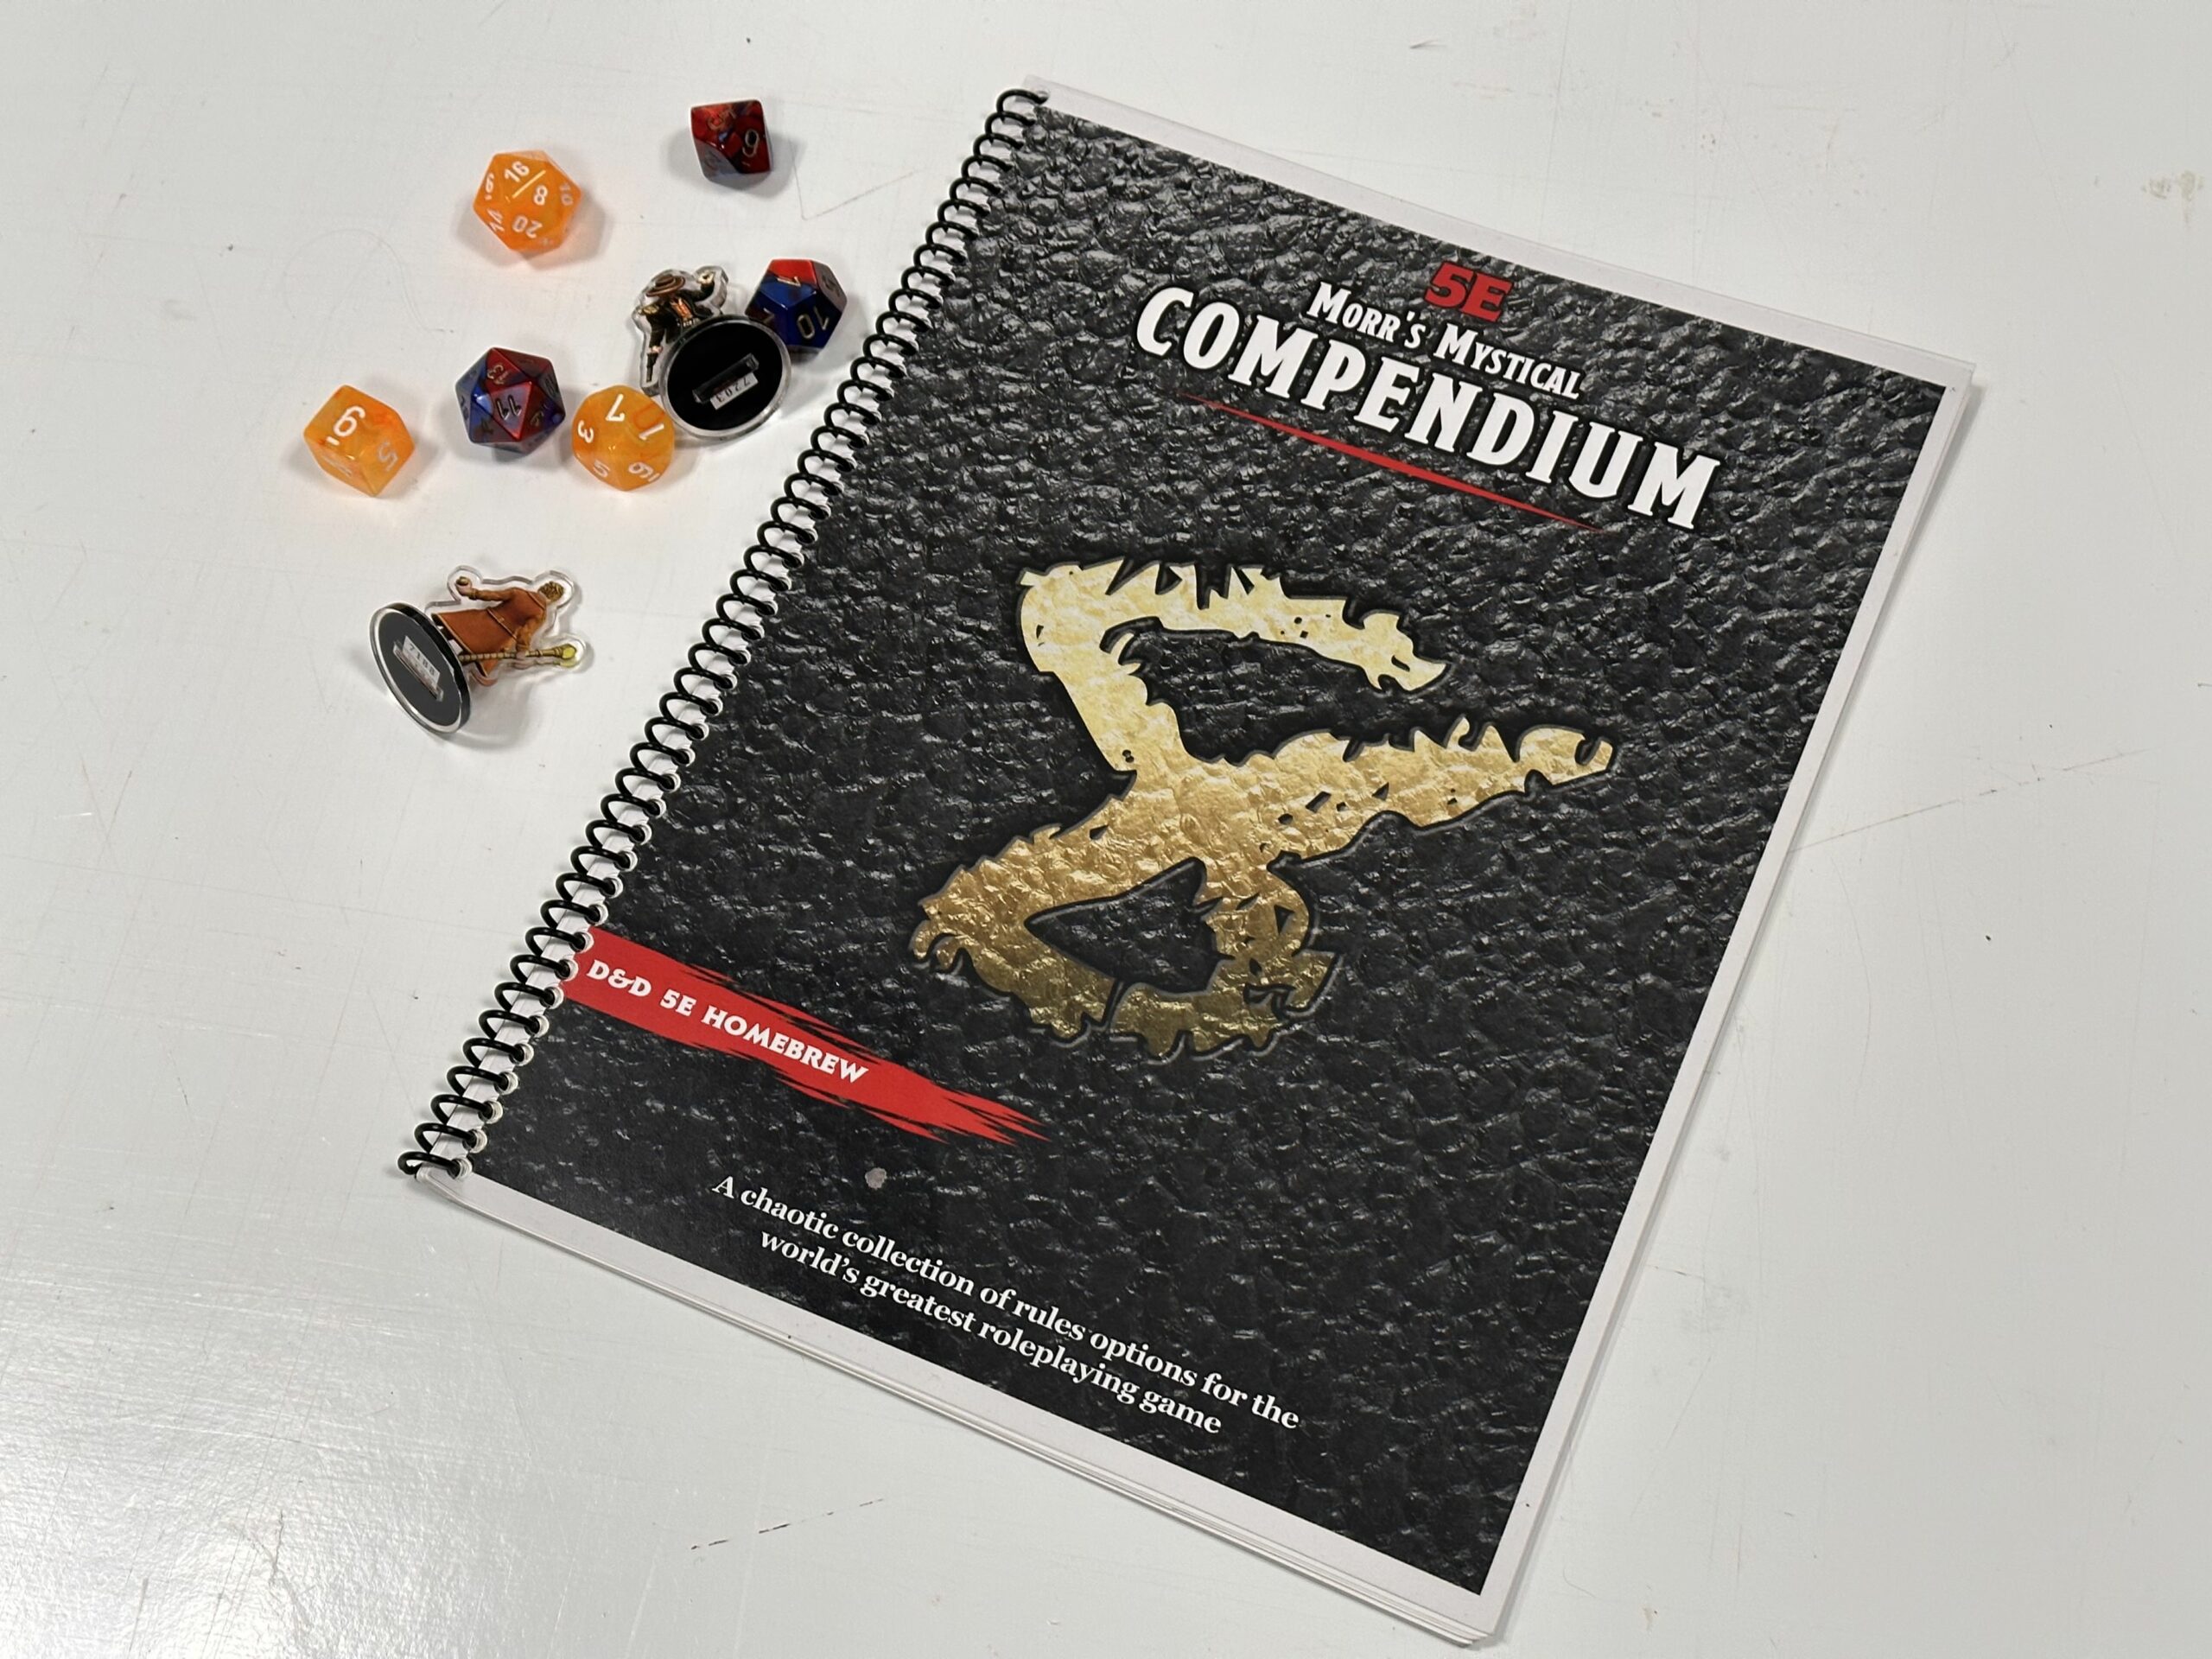 A photo of the printed book, next to some dice and miniatures made in Heroforge.com